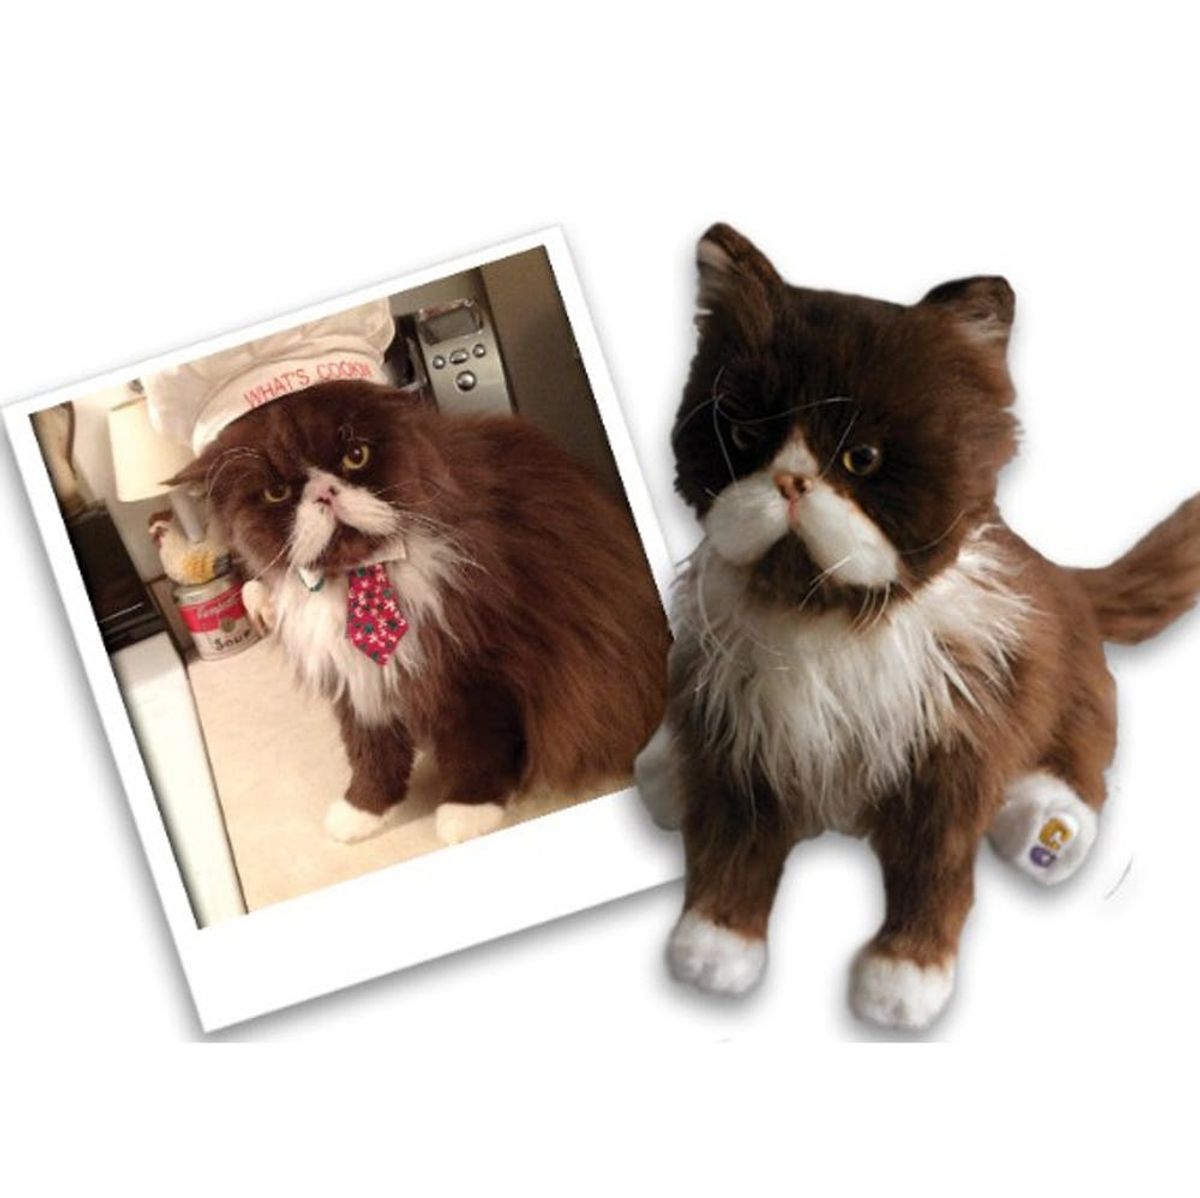 This Company Will Make Plush Versions of Your Pet